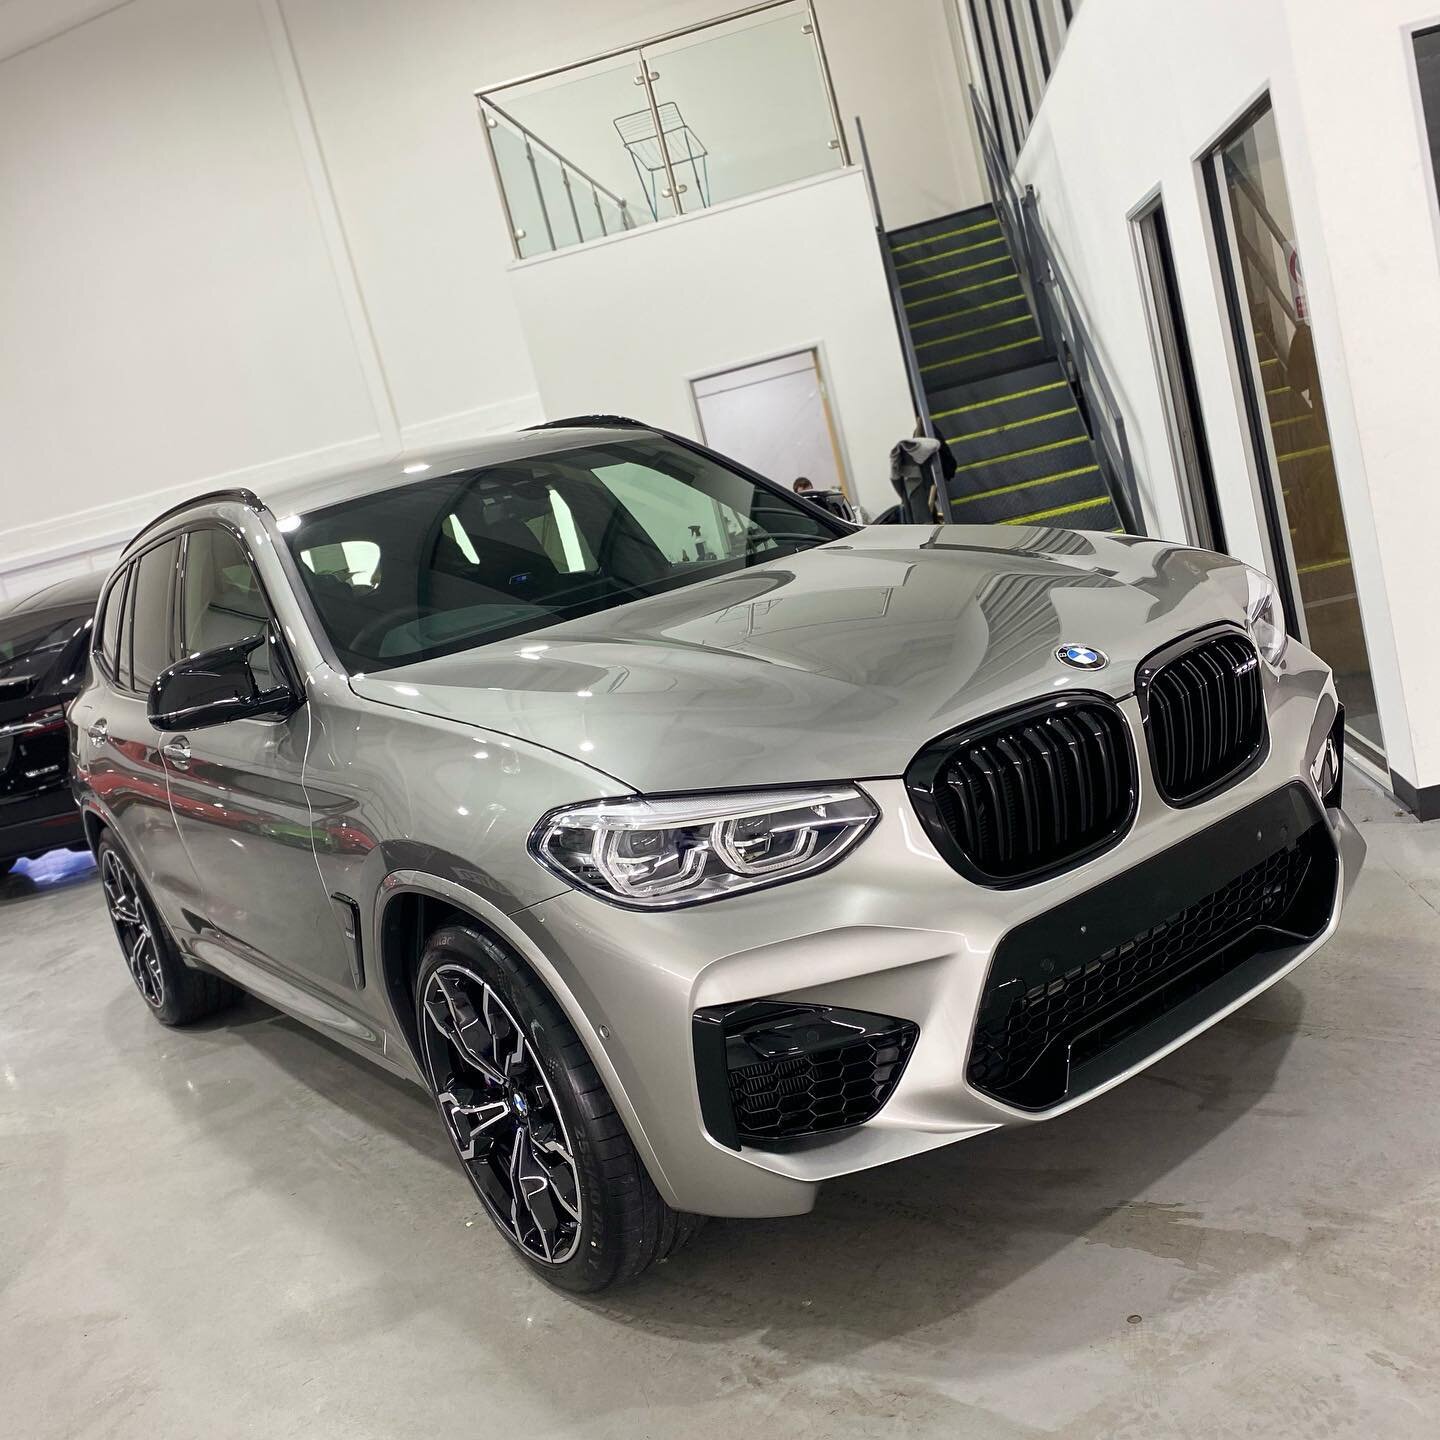 BMW X3M complete with new car detail, Full Front Extended PPF &amp; Ceramic Coating. #signaturegroup #ppf #detailing #bmw #x3m #paintprotectionfilm